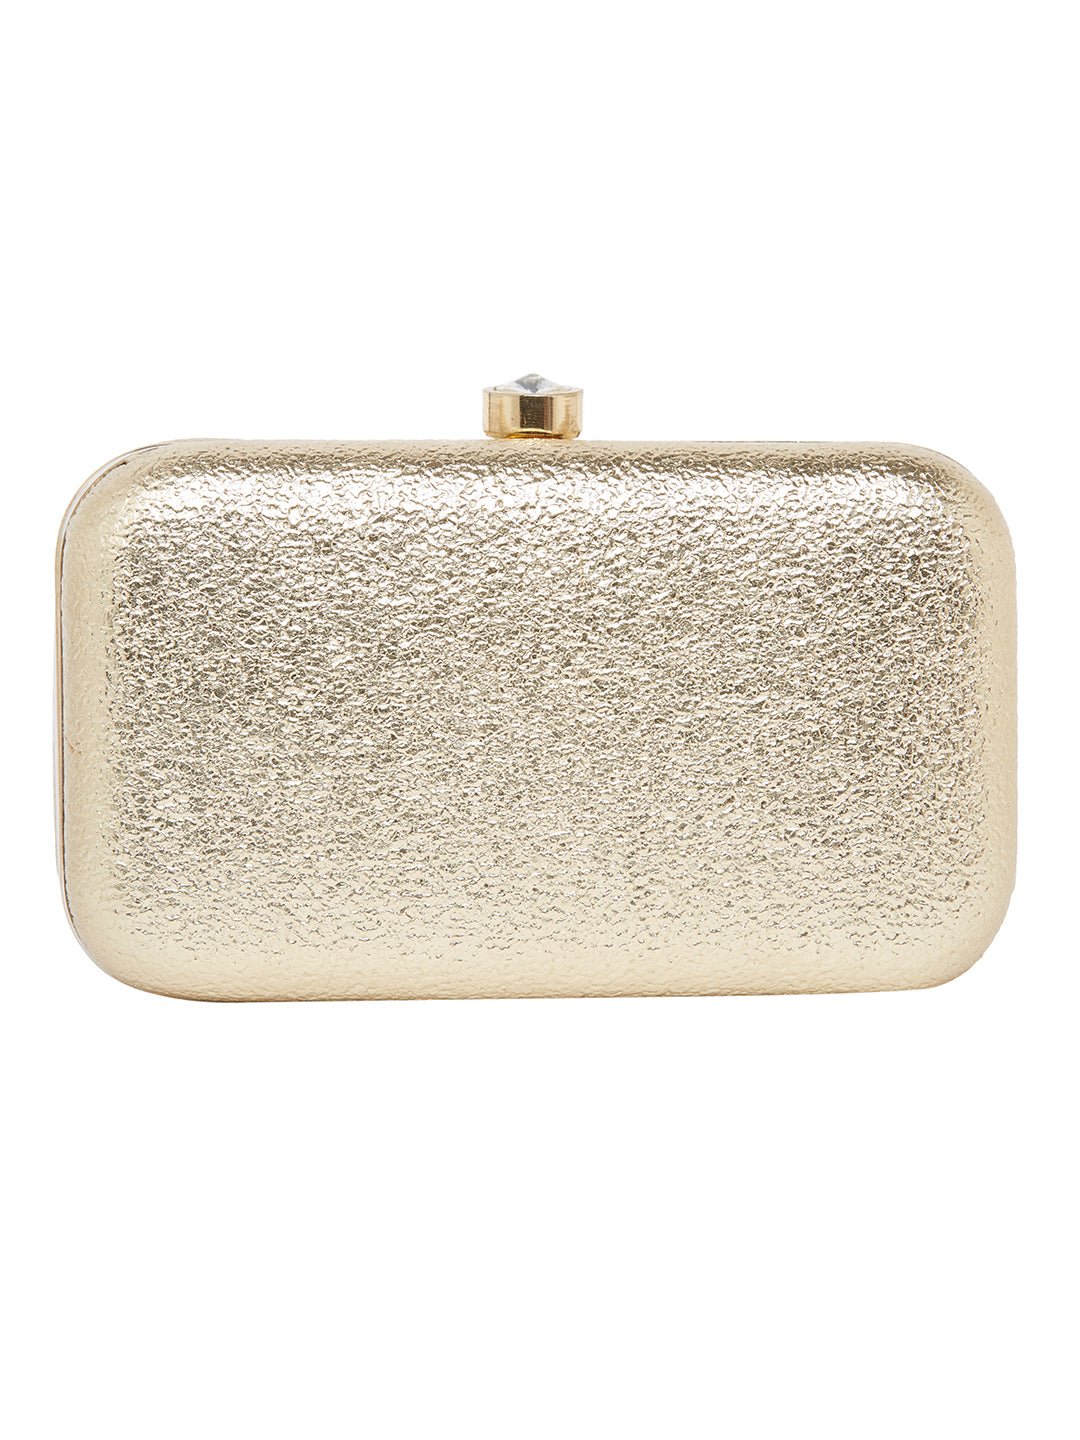 A Base gold clutch bag with a metal chain on a white background, made by Vdesi.